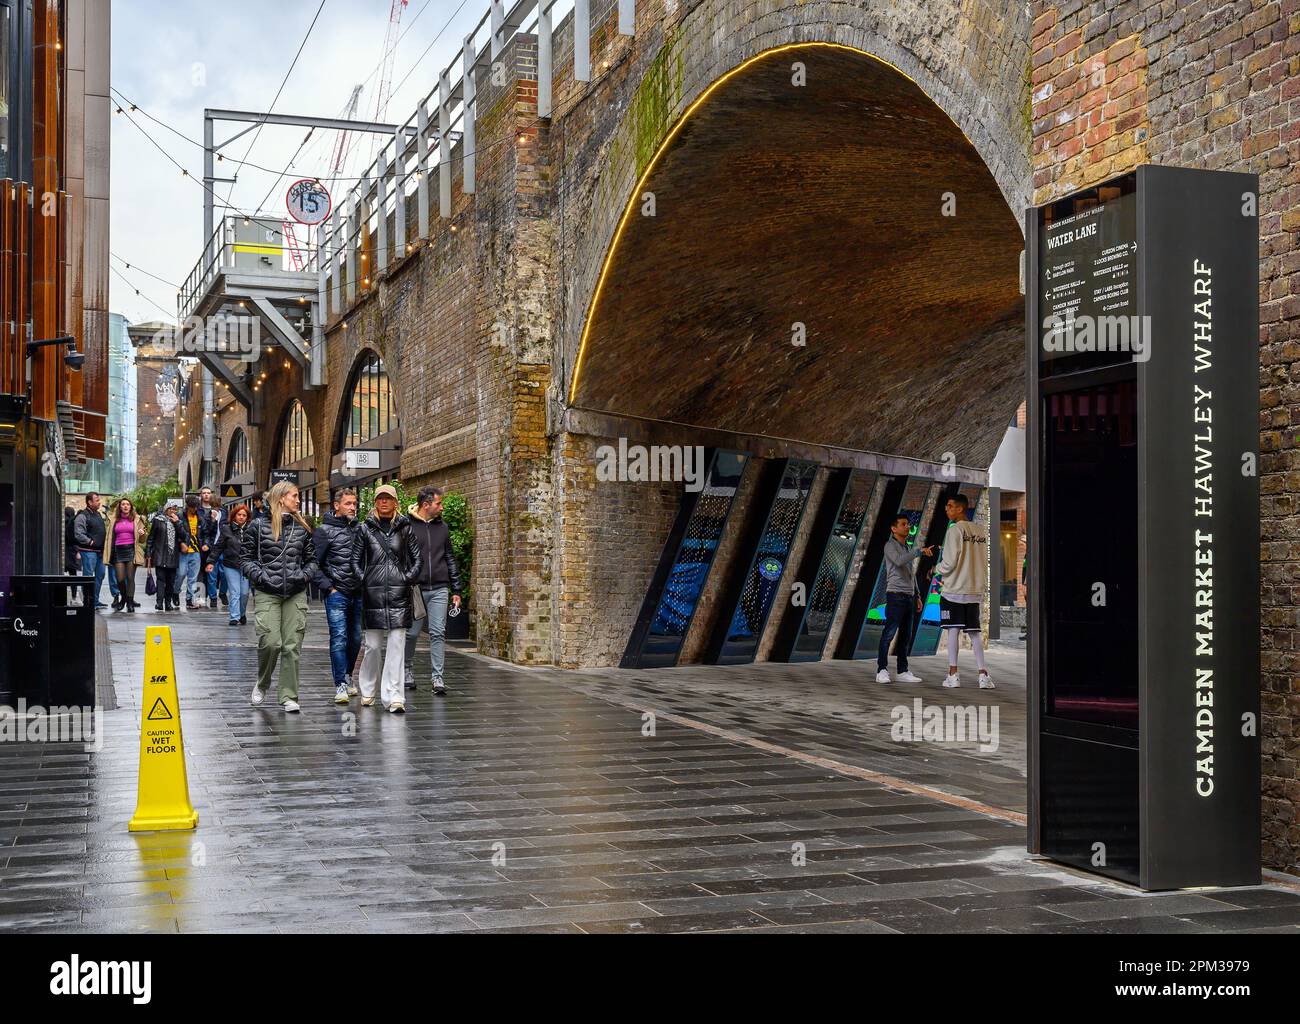 Camden Town, London, UK: Hawley Wharf, part of Camden Market. People walking in Water Lane by the railway viaduct. Stock Photo